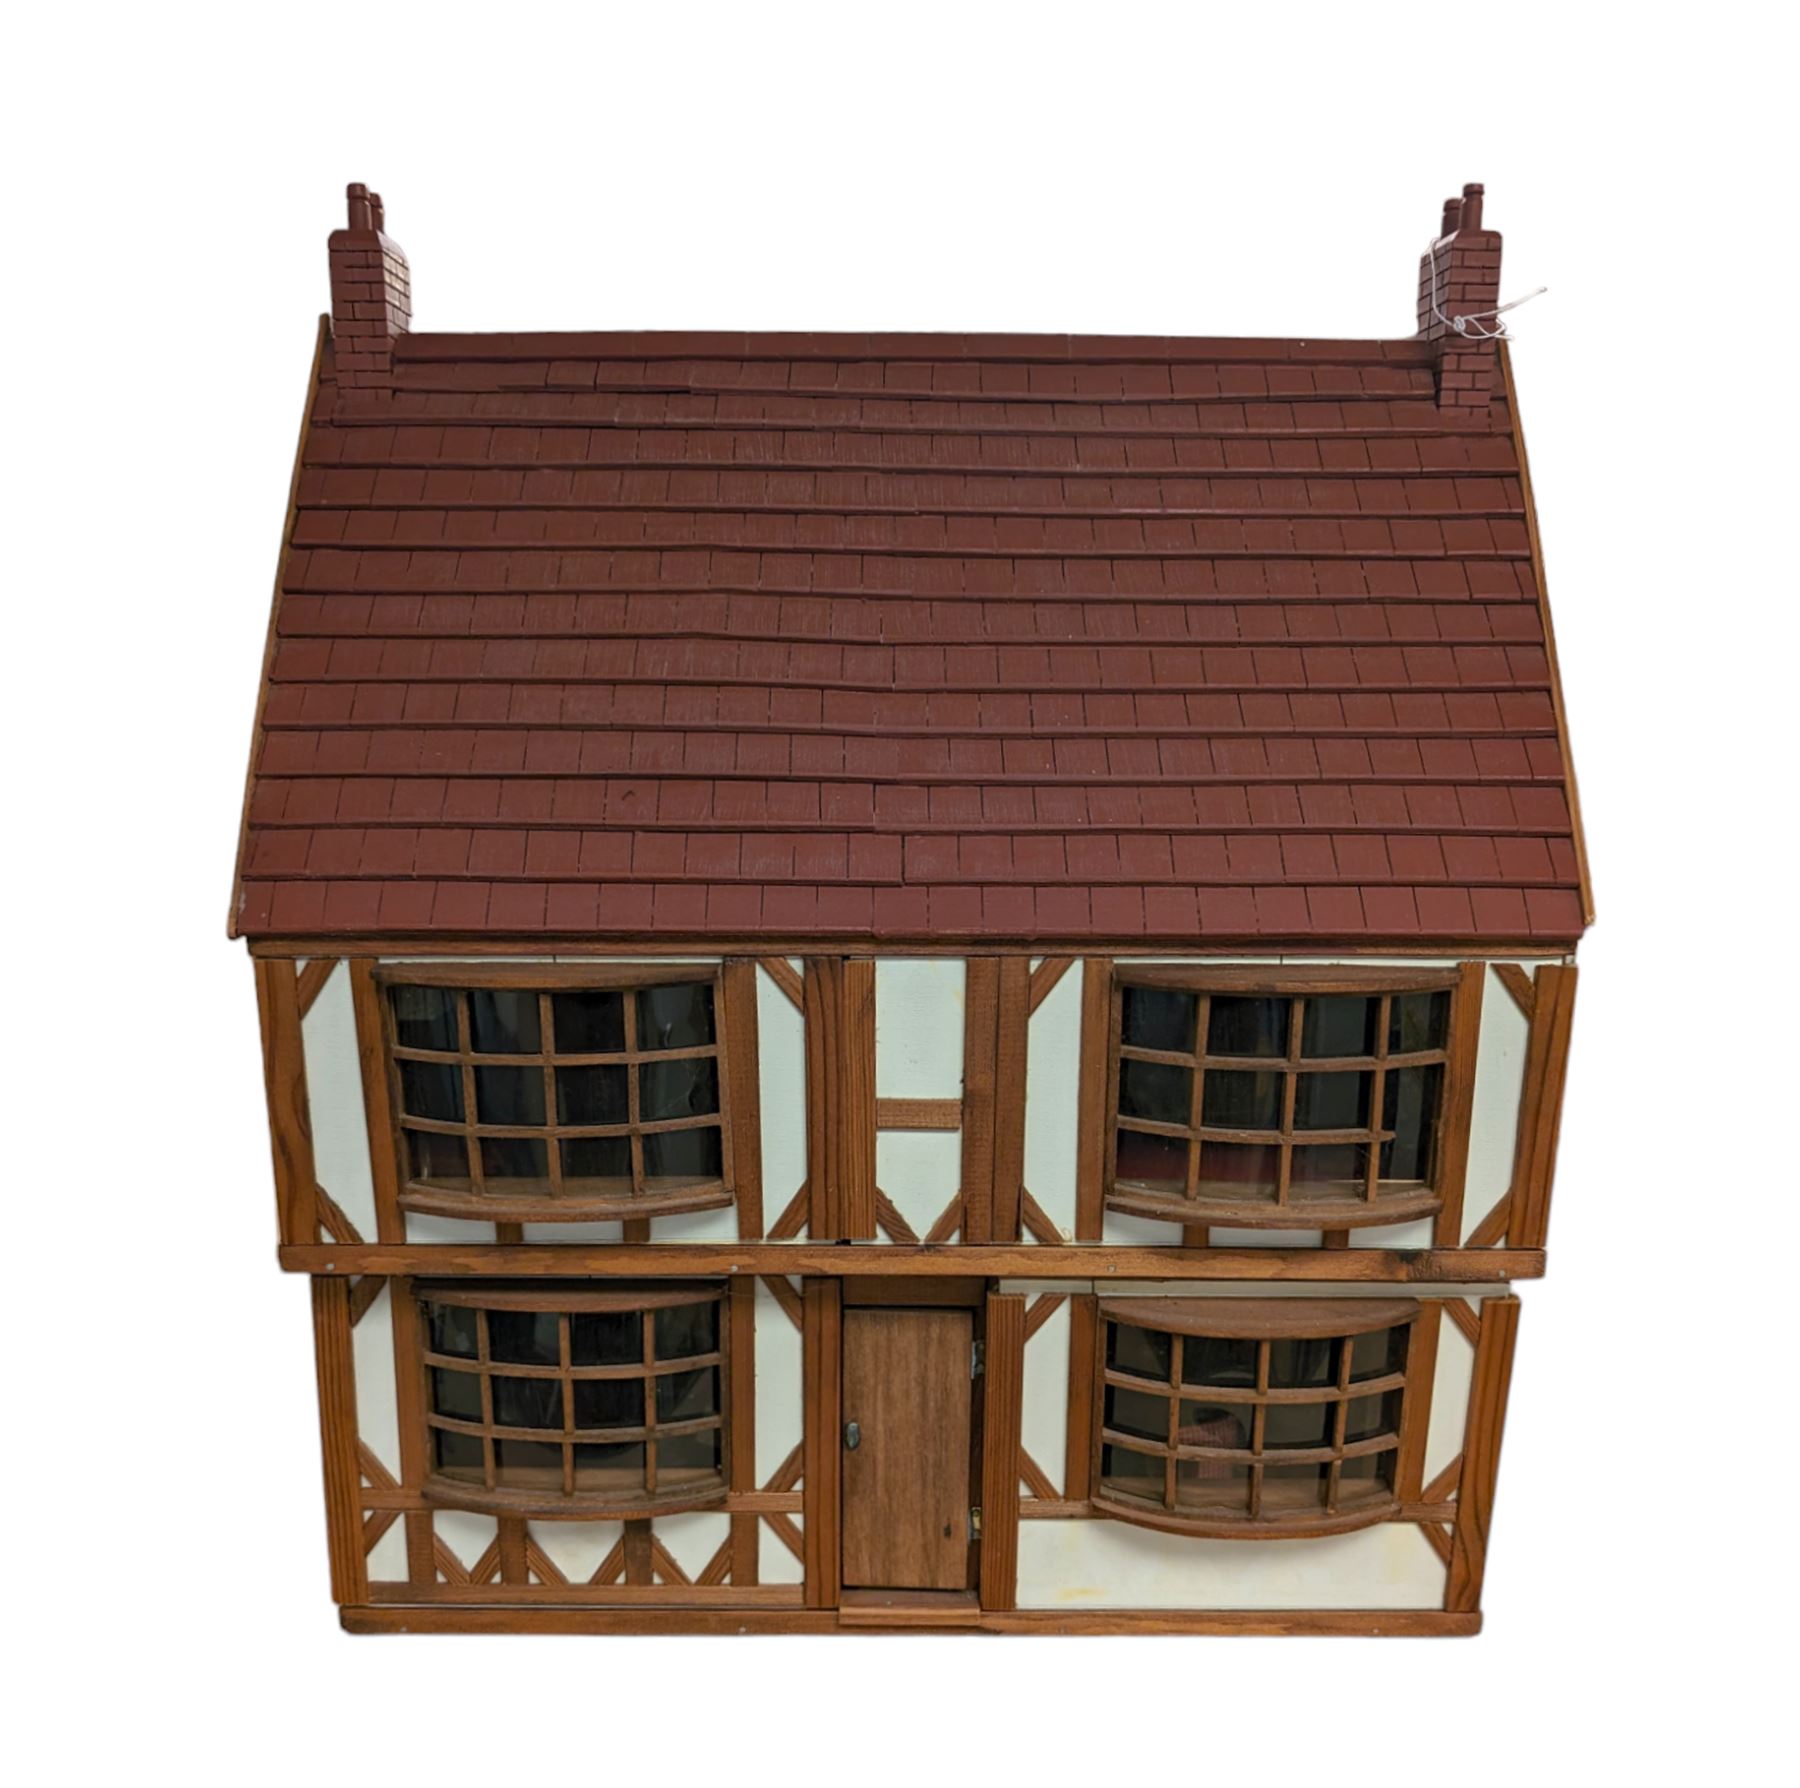 Two storey wooden dolls house with sliding panels